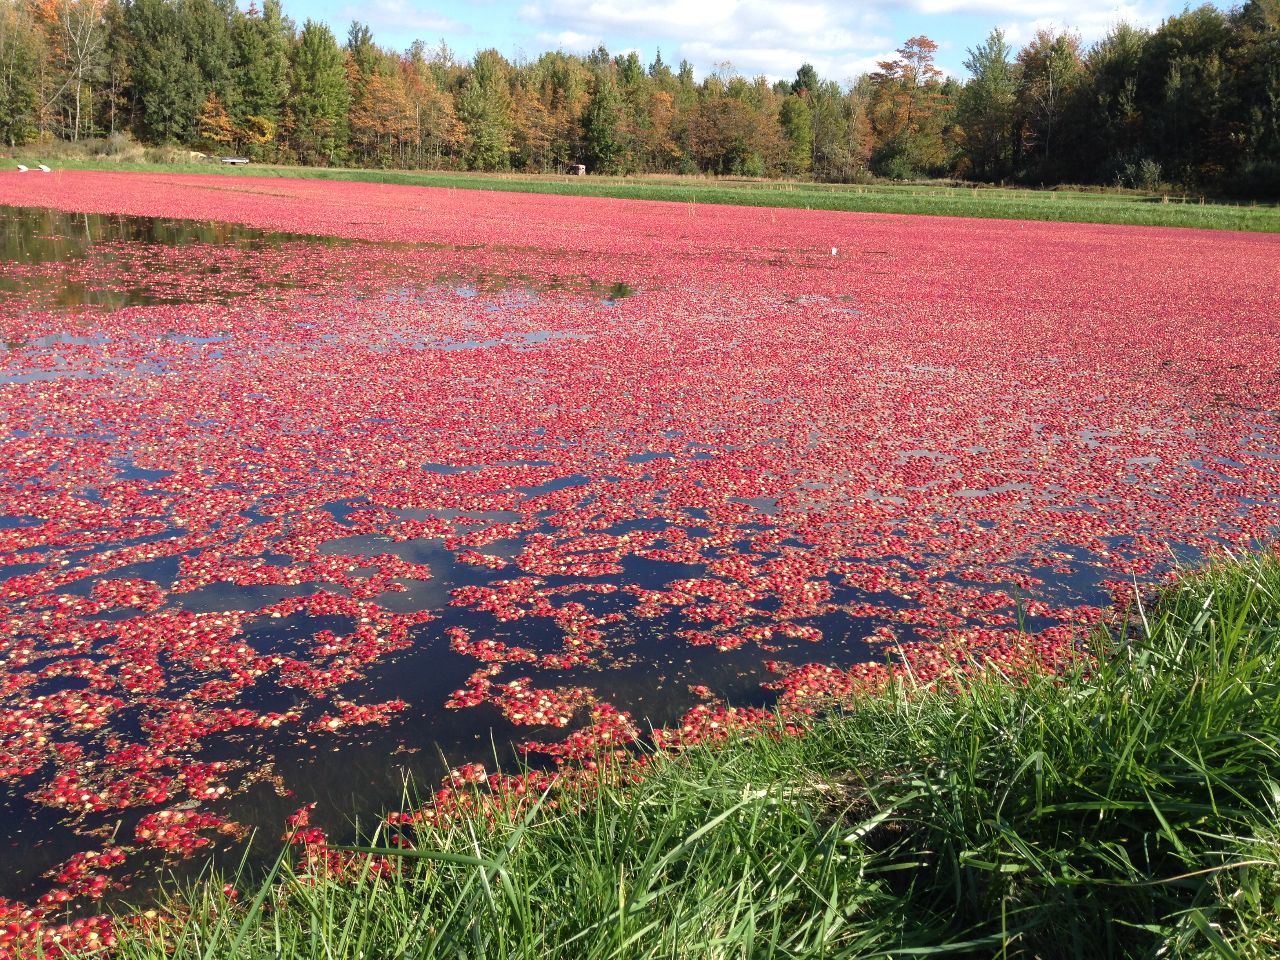 A Michigan cranberry bog, flooded and ready for harvest.